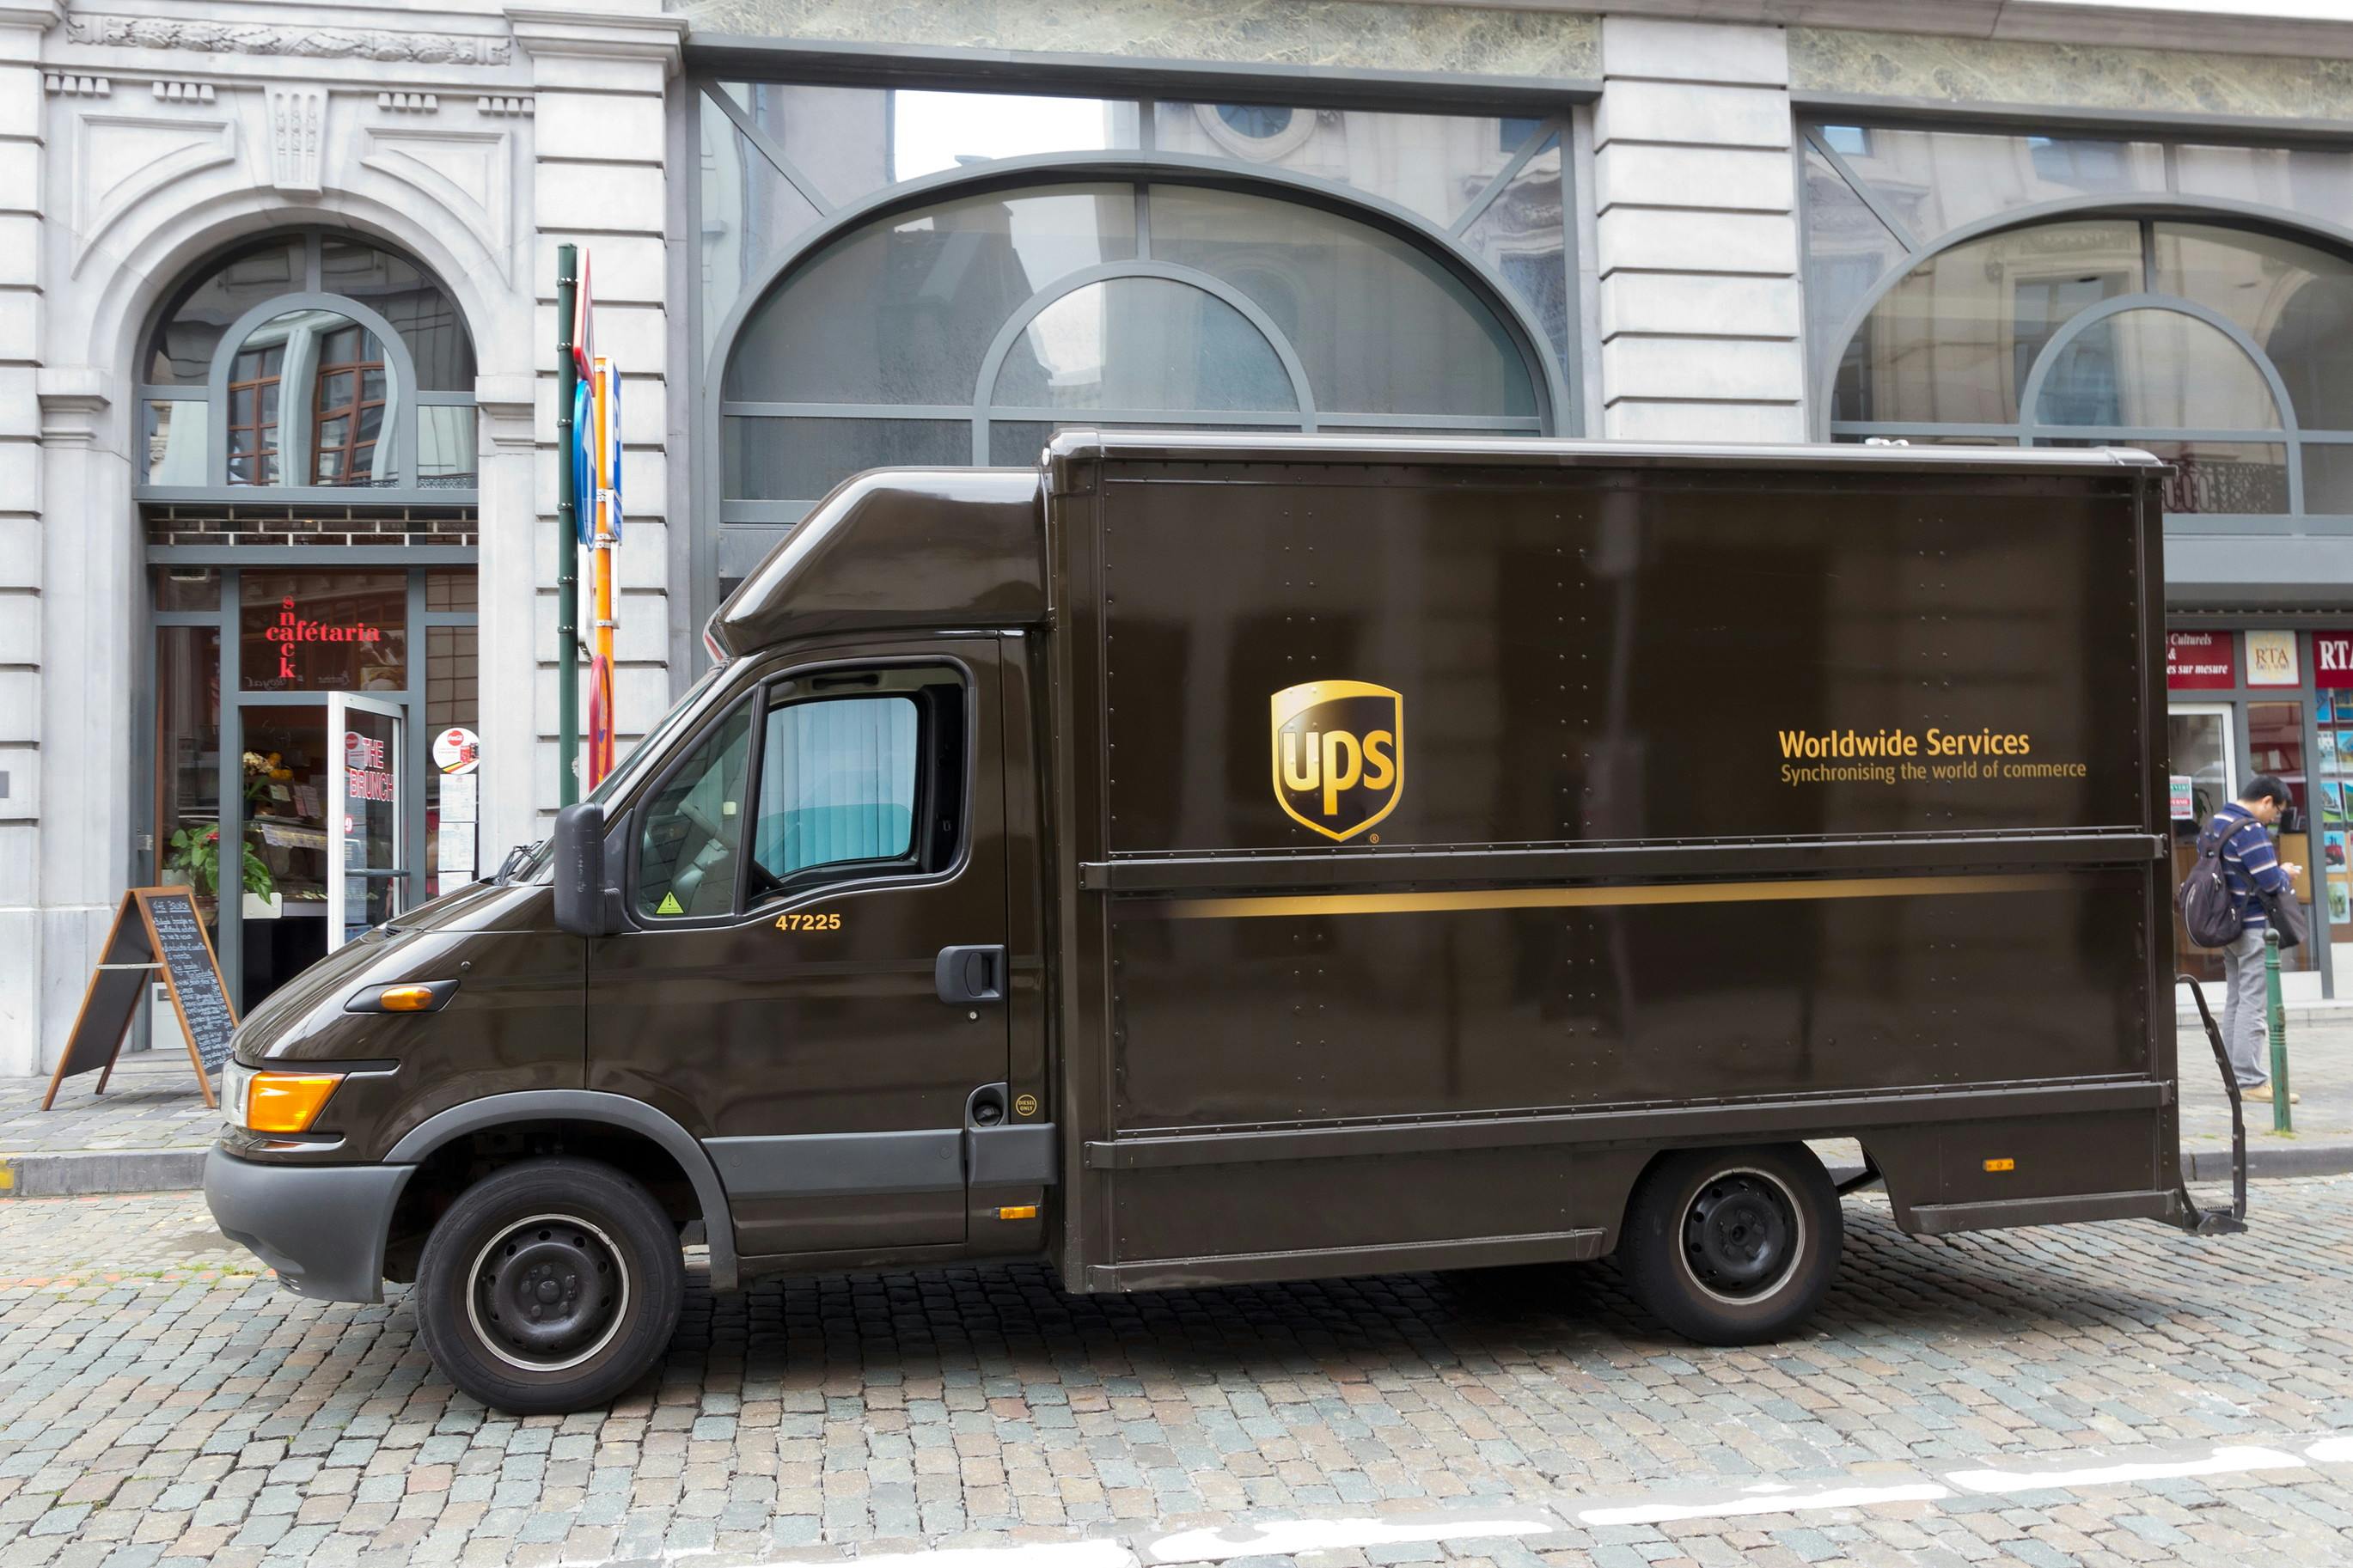 Image of a parked UPS truck in front of a store